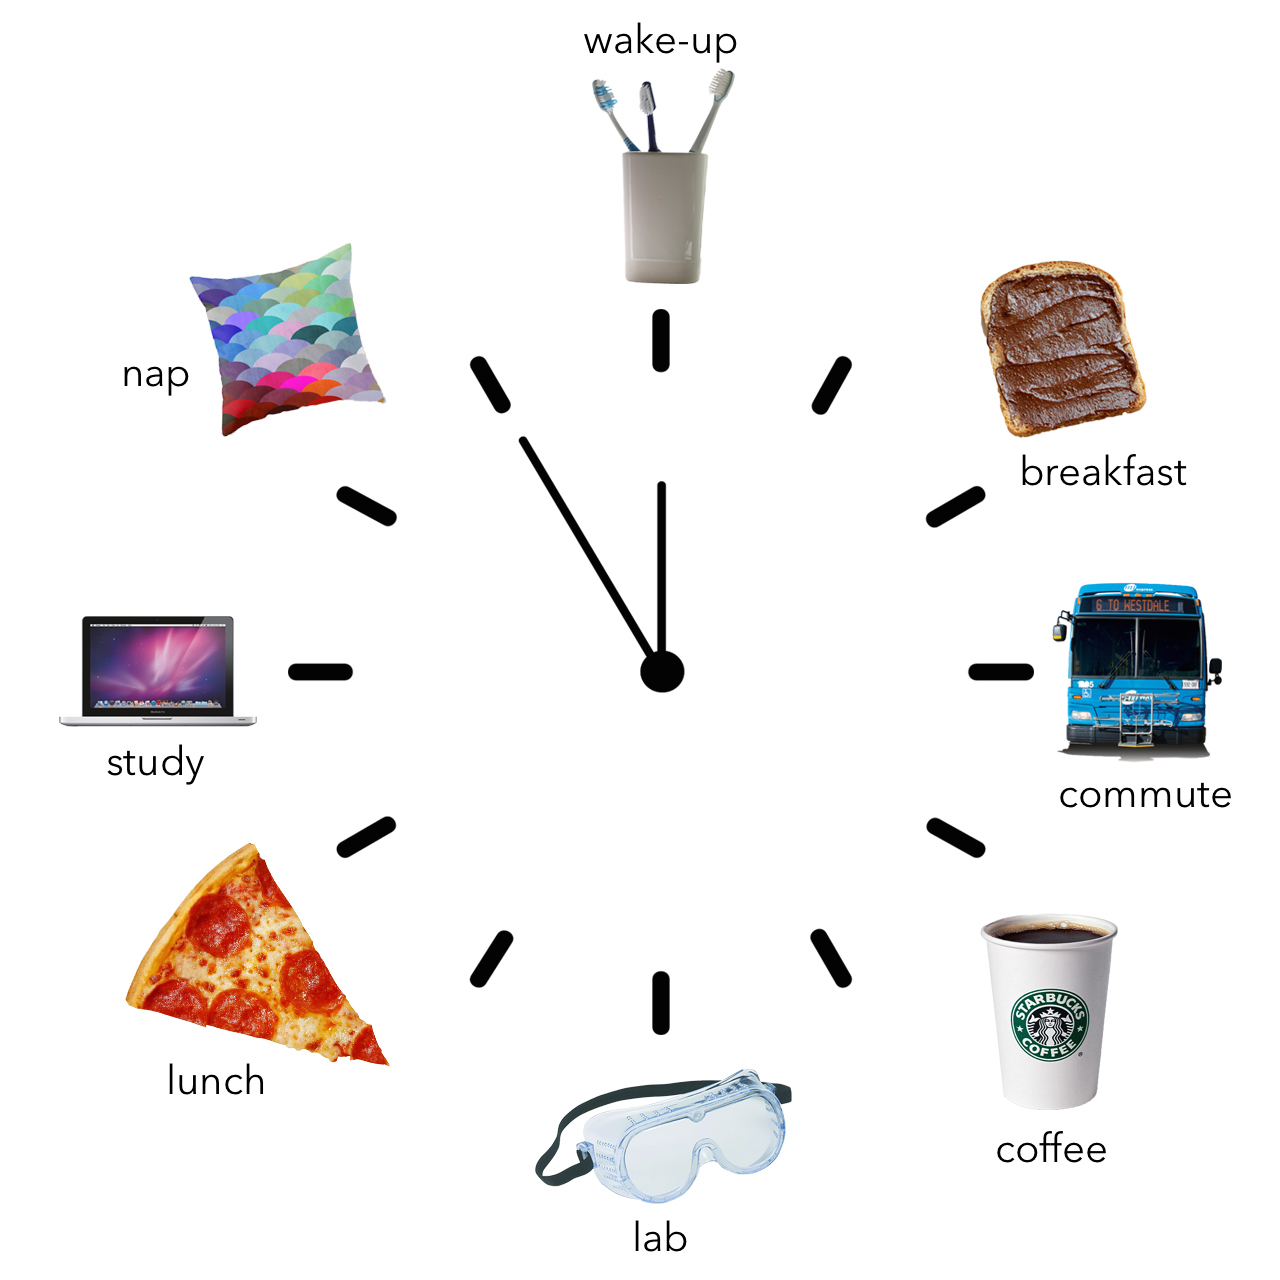 I Photoshopped a graphic of the hands of a clock, with different symbols for each hour that detail a typical school day. For example, at the "start" of the clock, I have a toothbrush. Other symbols include a bus, a coffee cup, pizza, and a laptop.